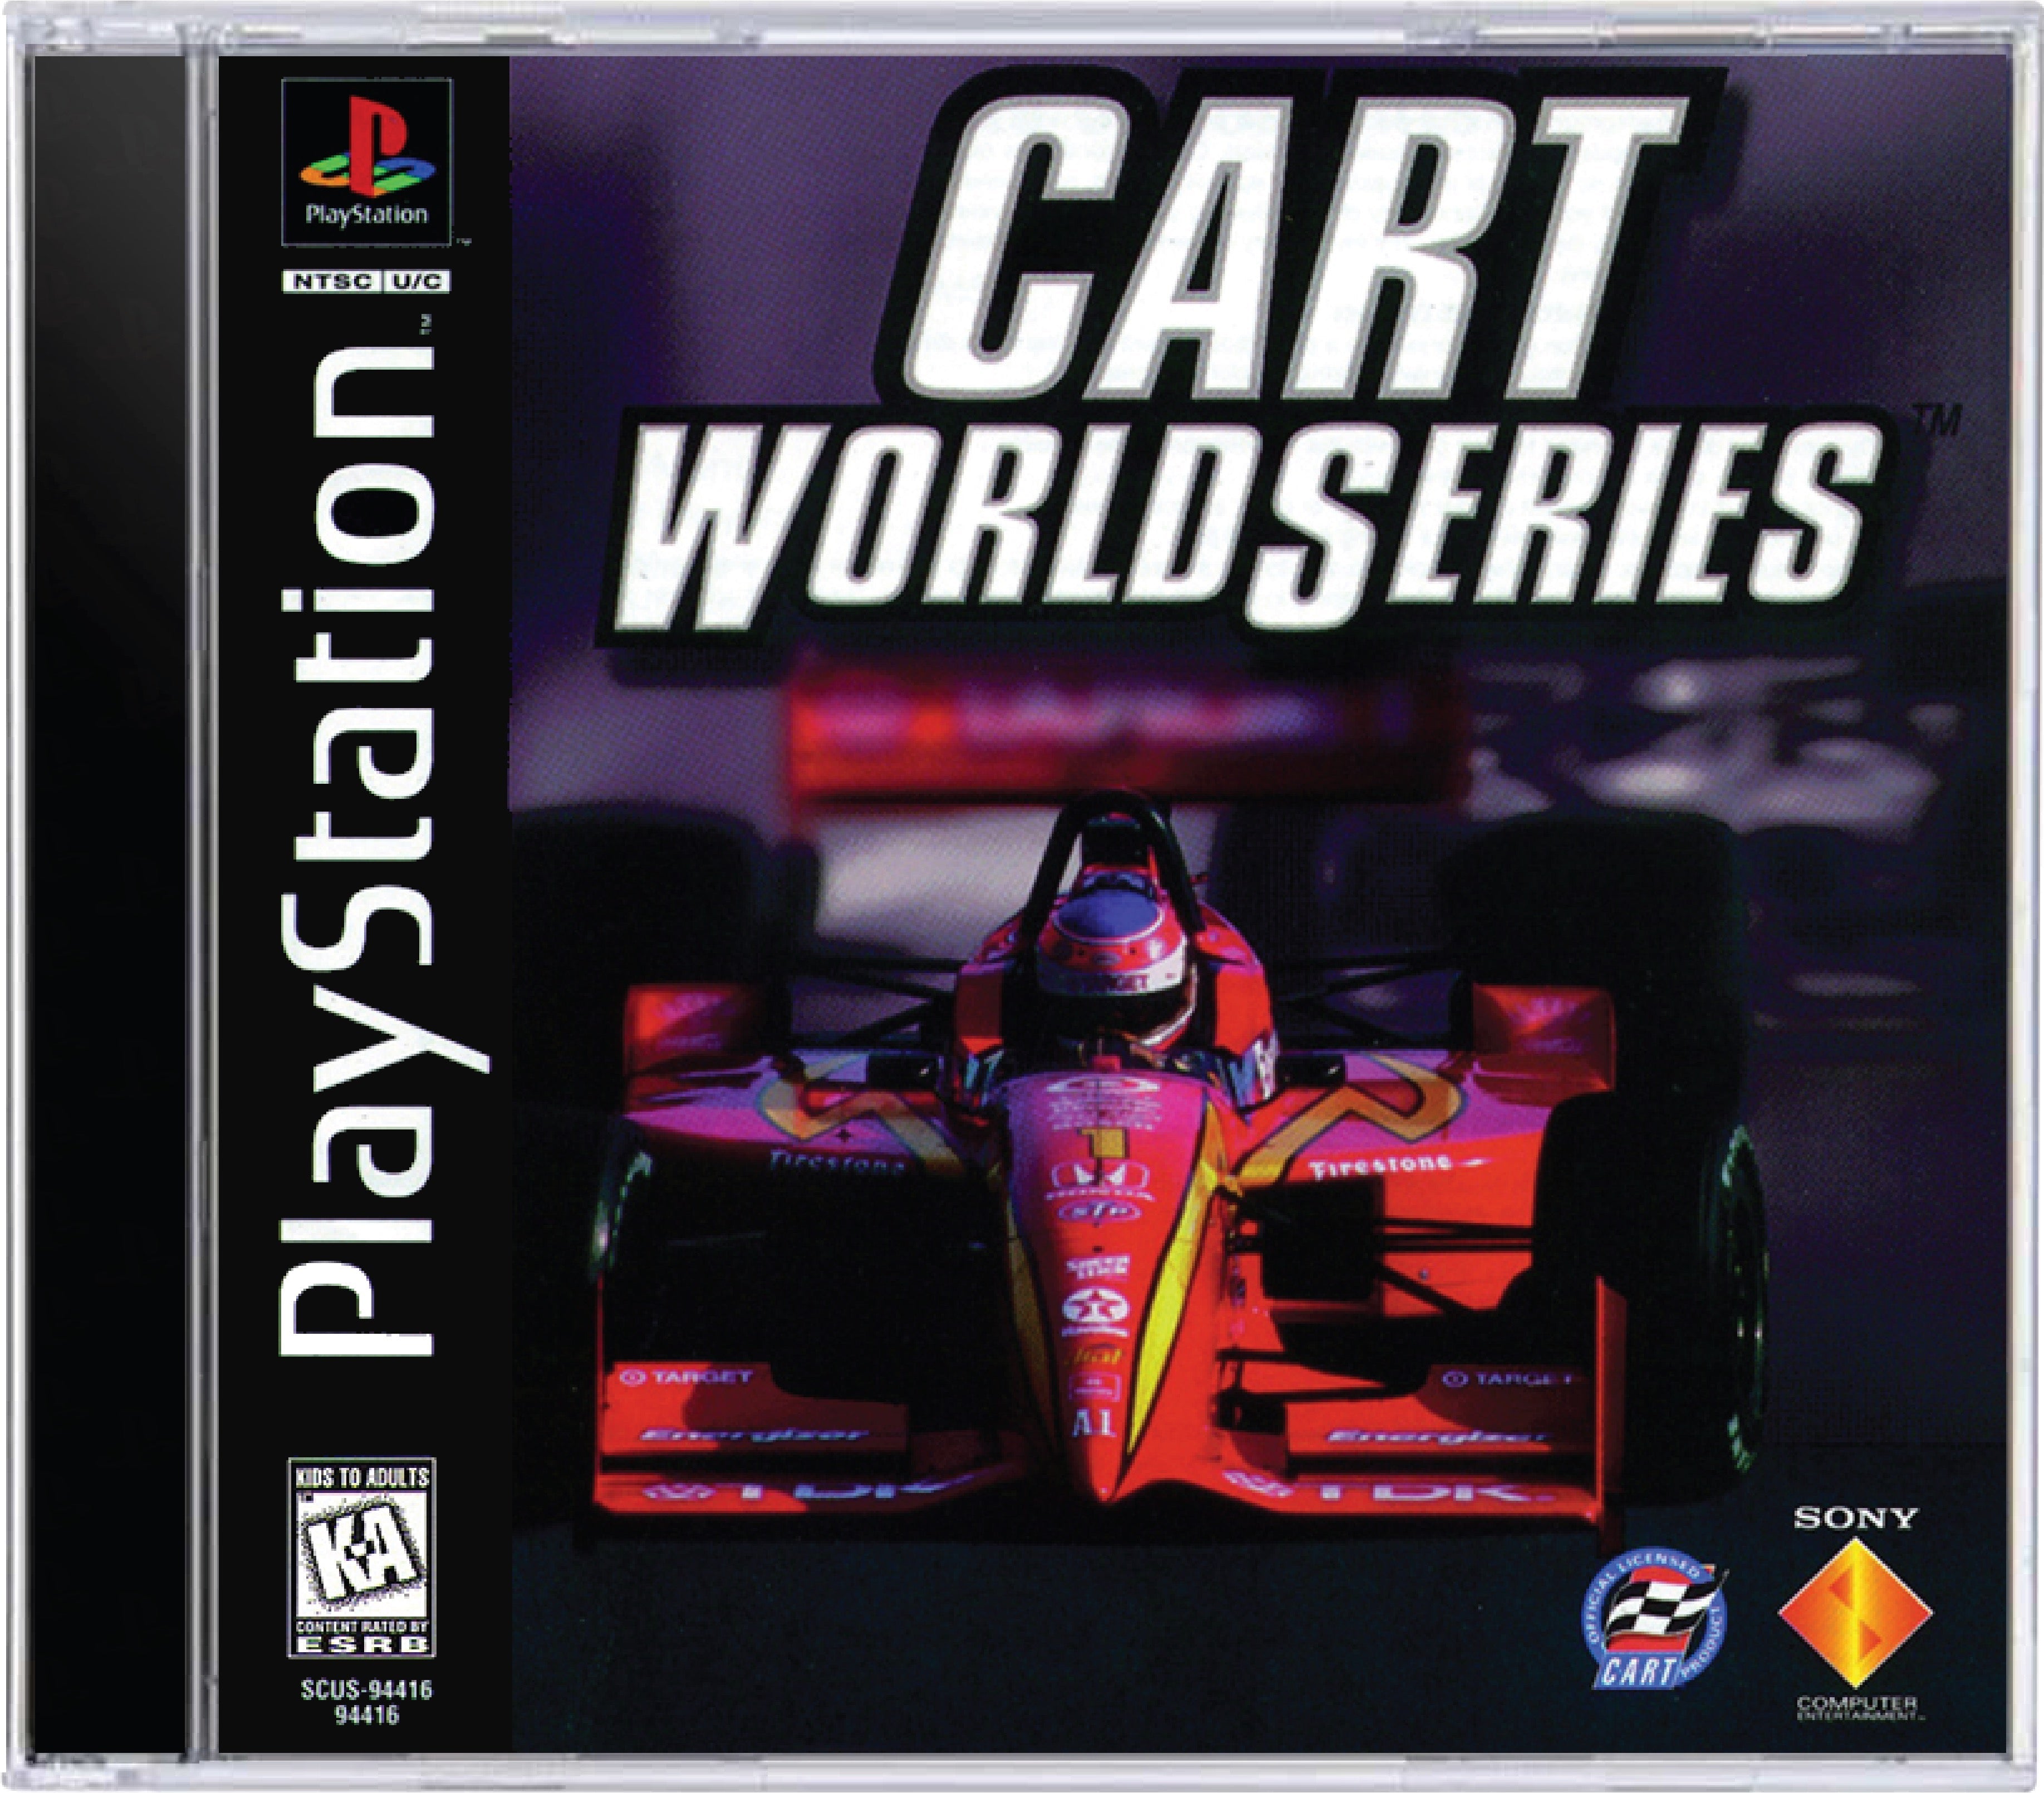 CART World Series Cover Art and Product Photo